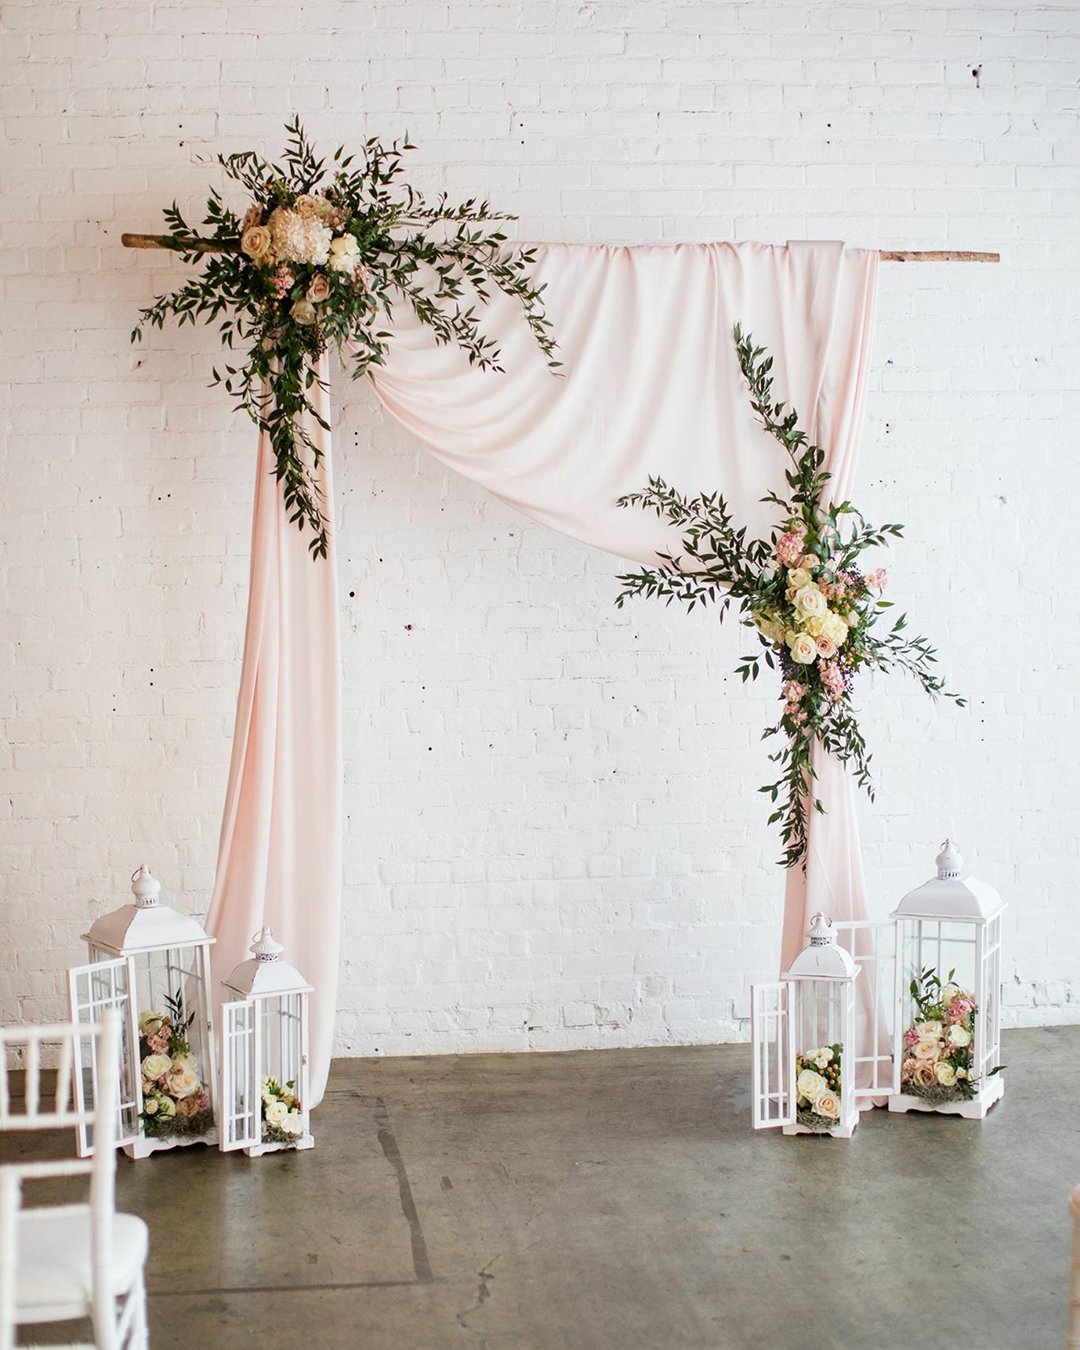 wedding ceremony decorations with pink draping cloth and flowers with greenery blossom vintage rentals